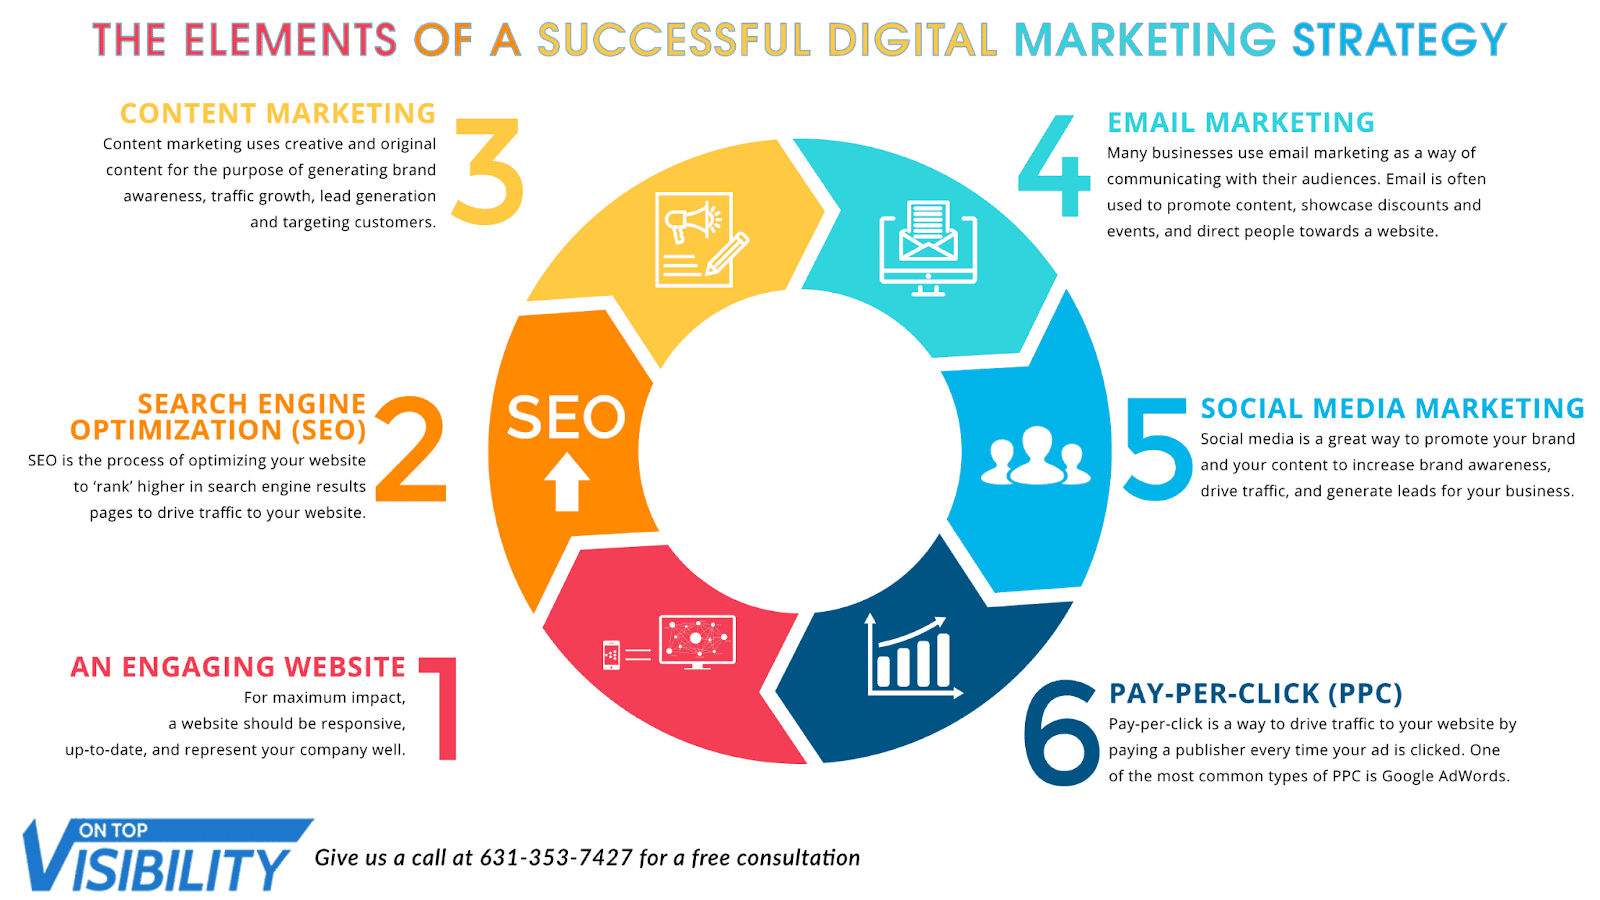 An image showing the elements of a digital marketing strategy